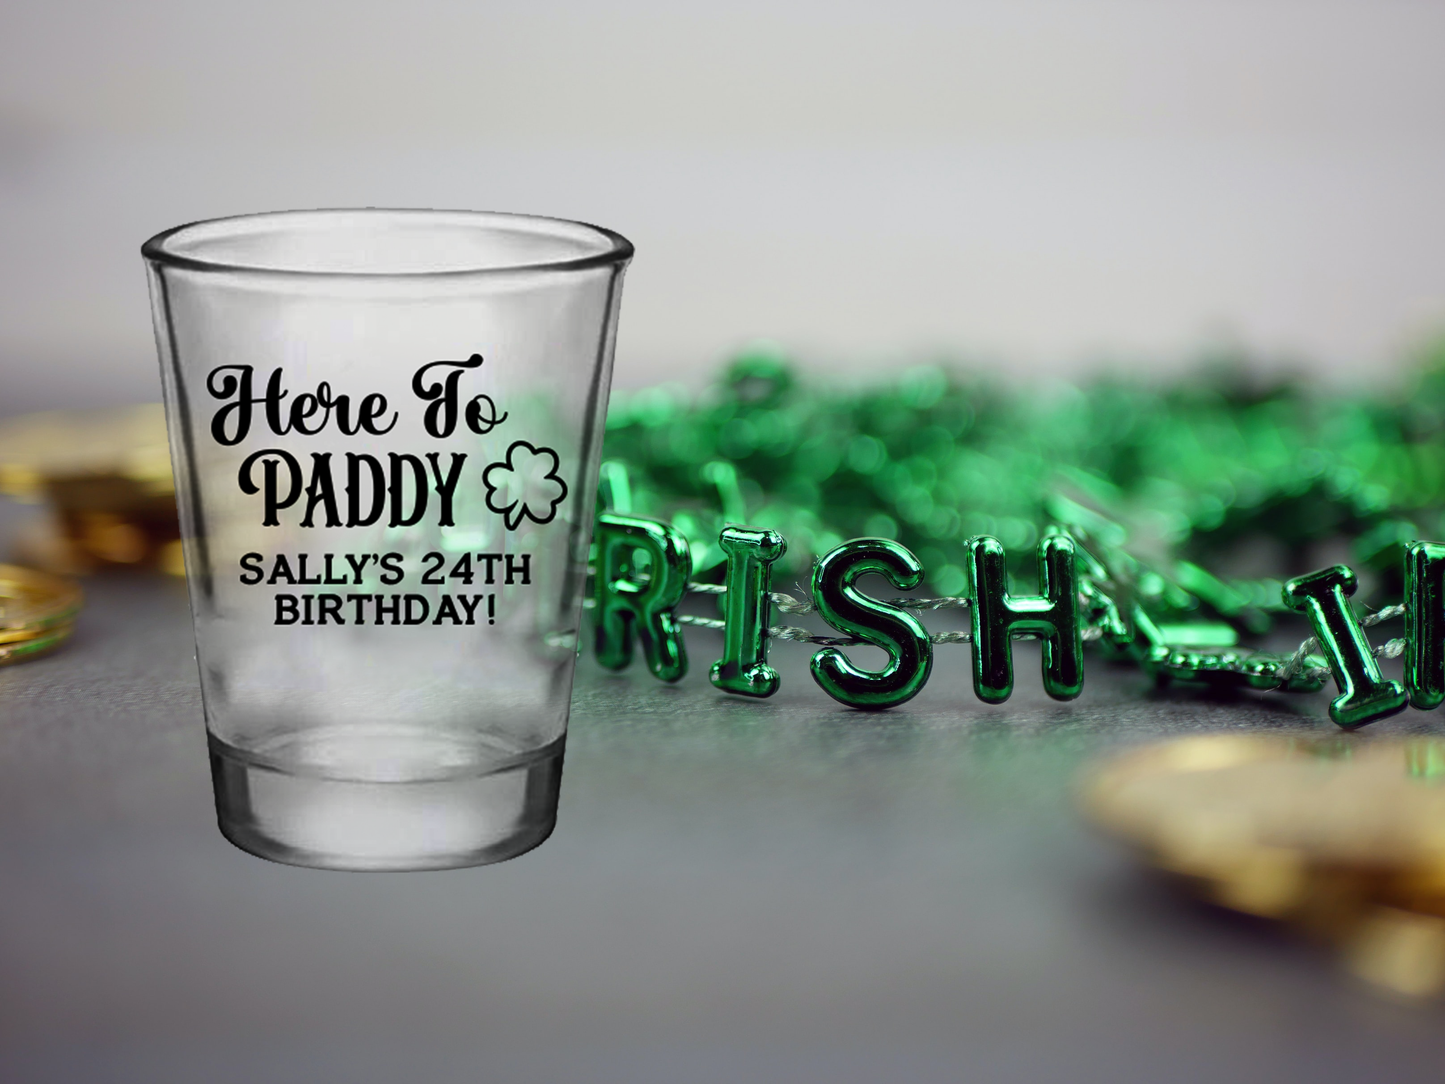 Here to Paddy Shot Glasses